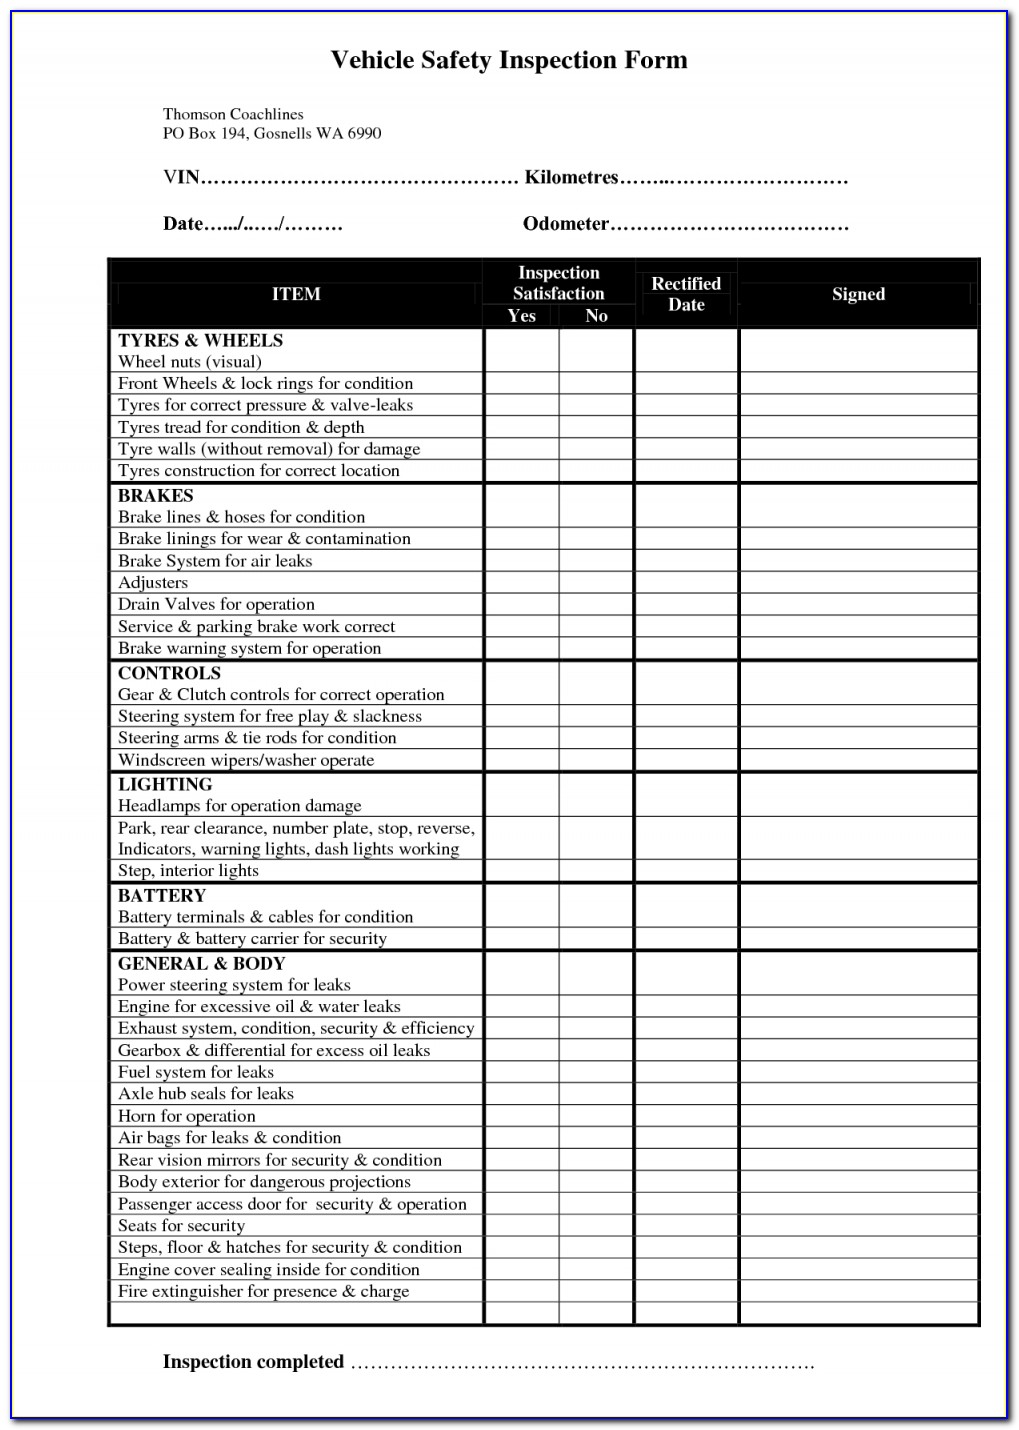 Vehicle Safety Checklist Template Choice Image Template Design Ideas In Vehicle Safety Checklist Form